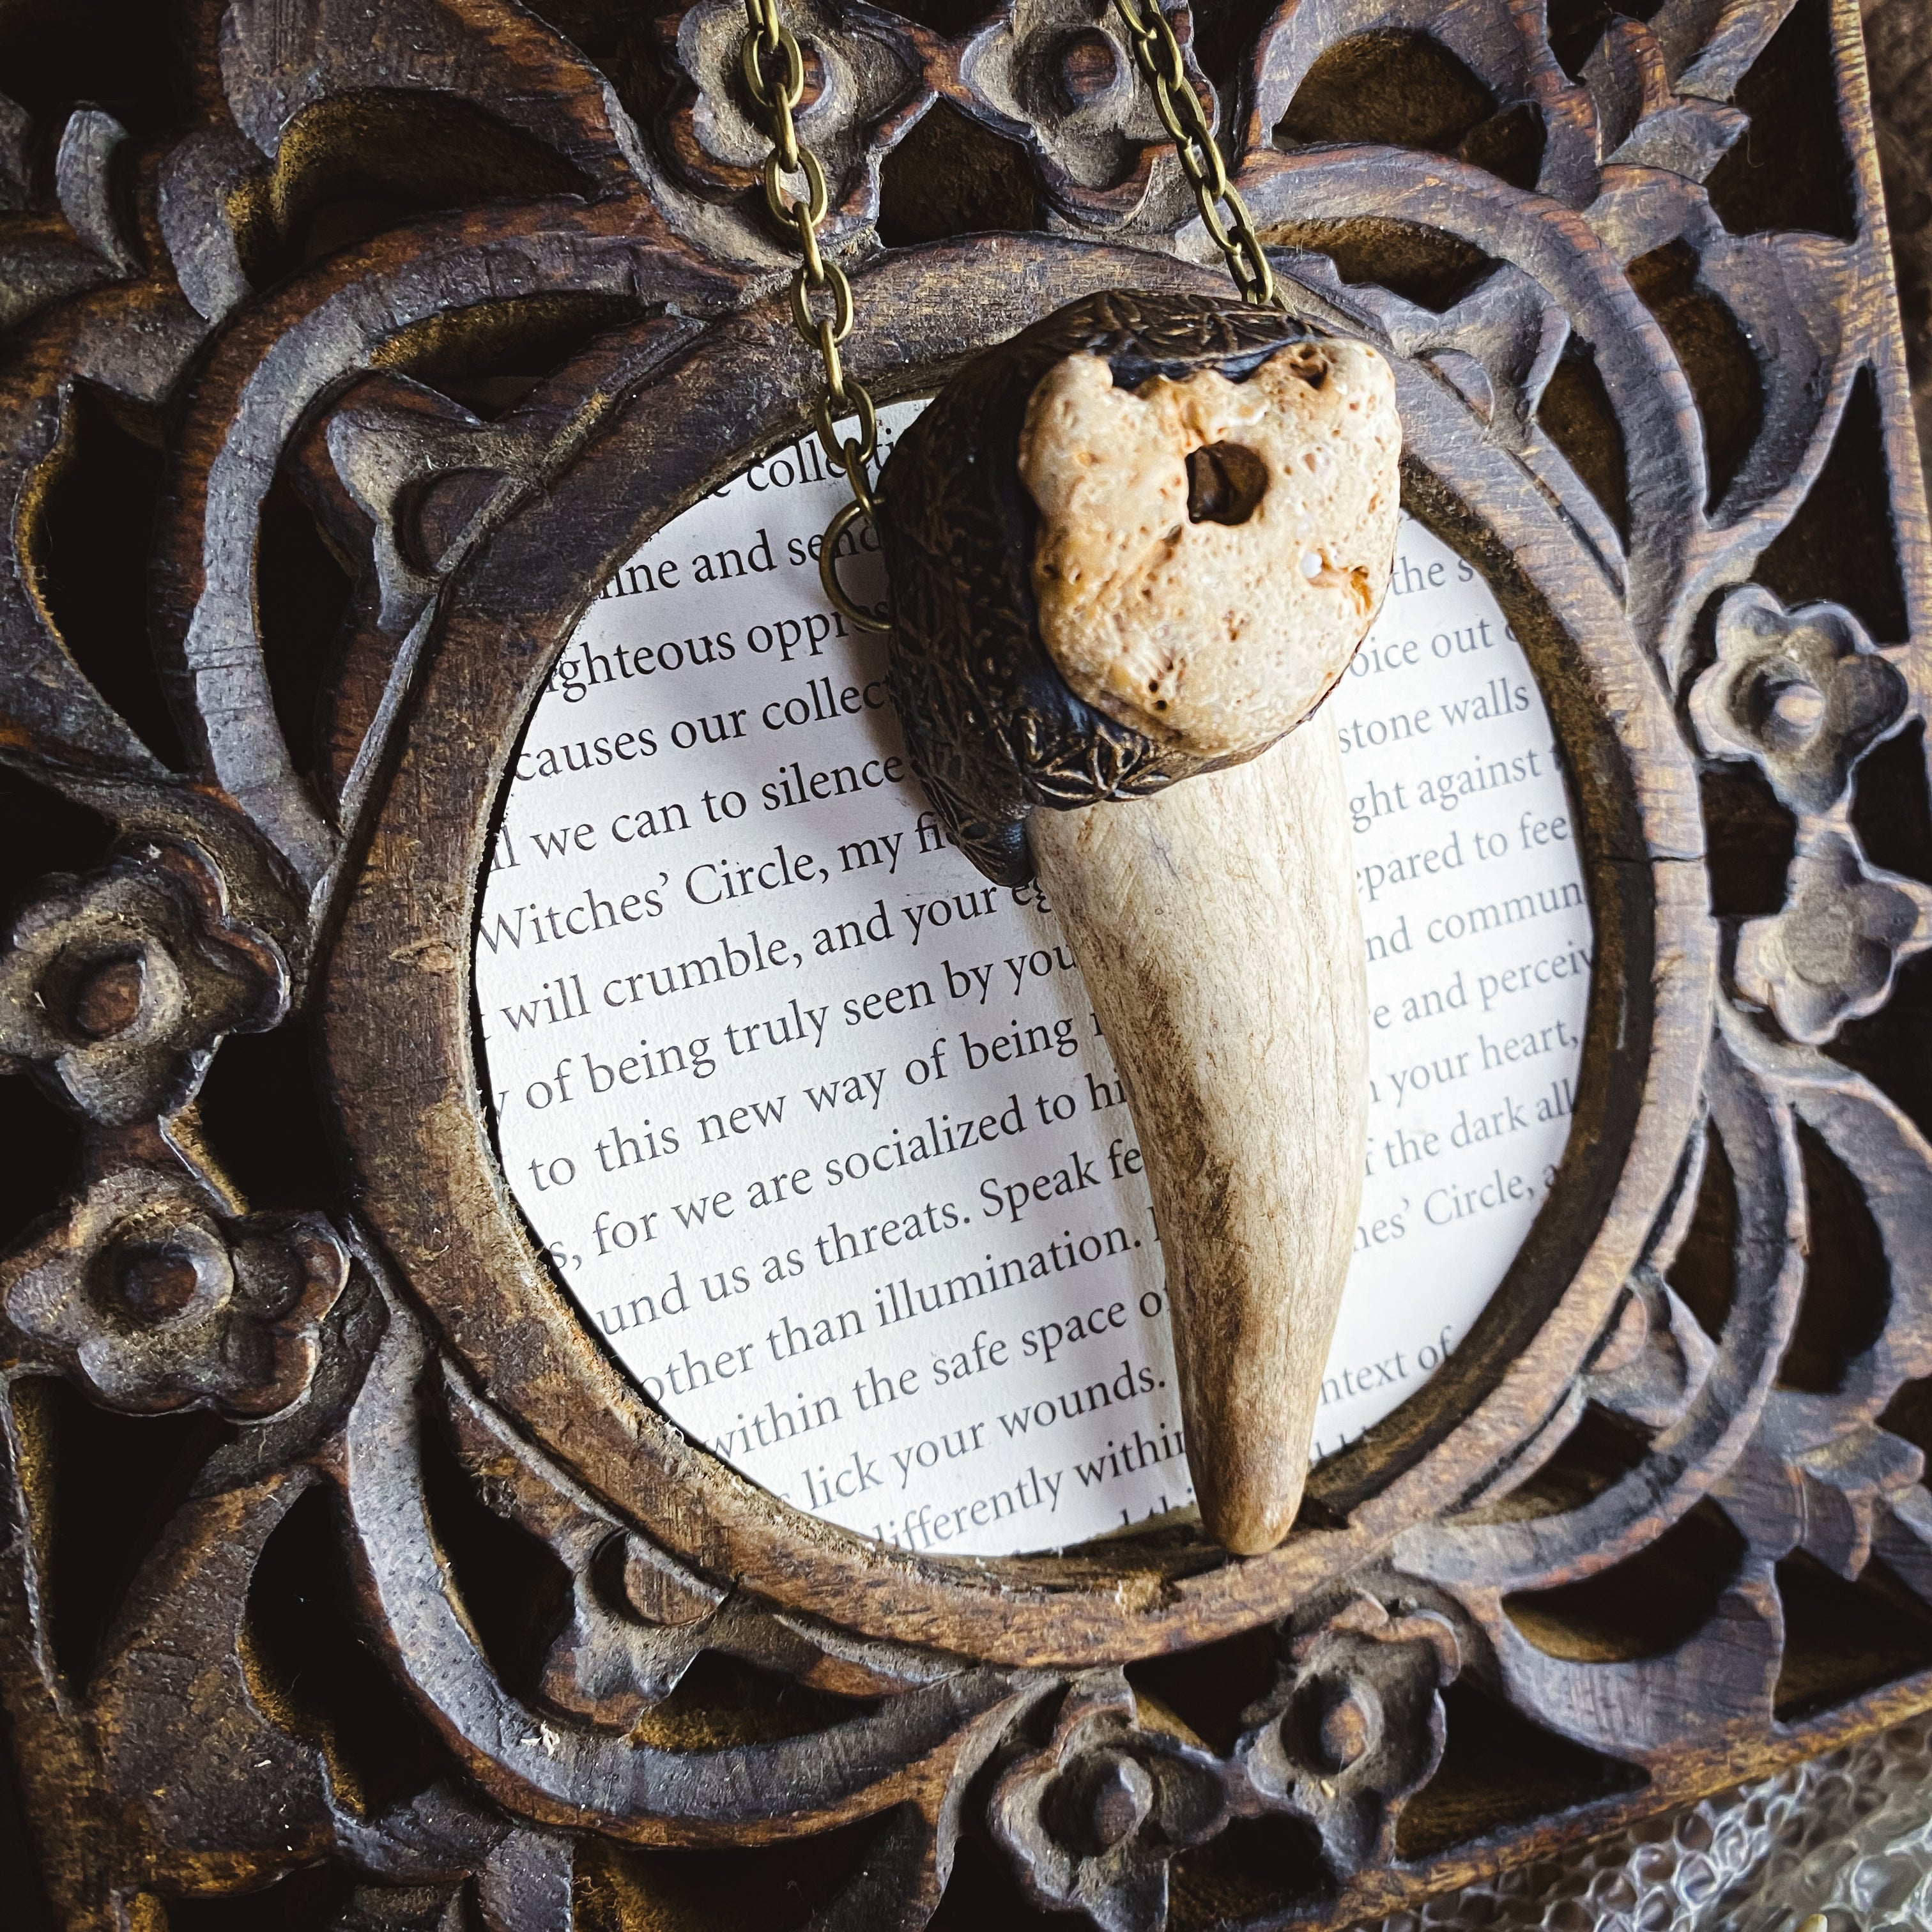 Deer Medicine Necklace - Handcrafted Antler and Hag StoneTalisman with the Flower of Life Design